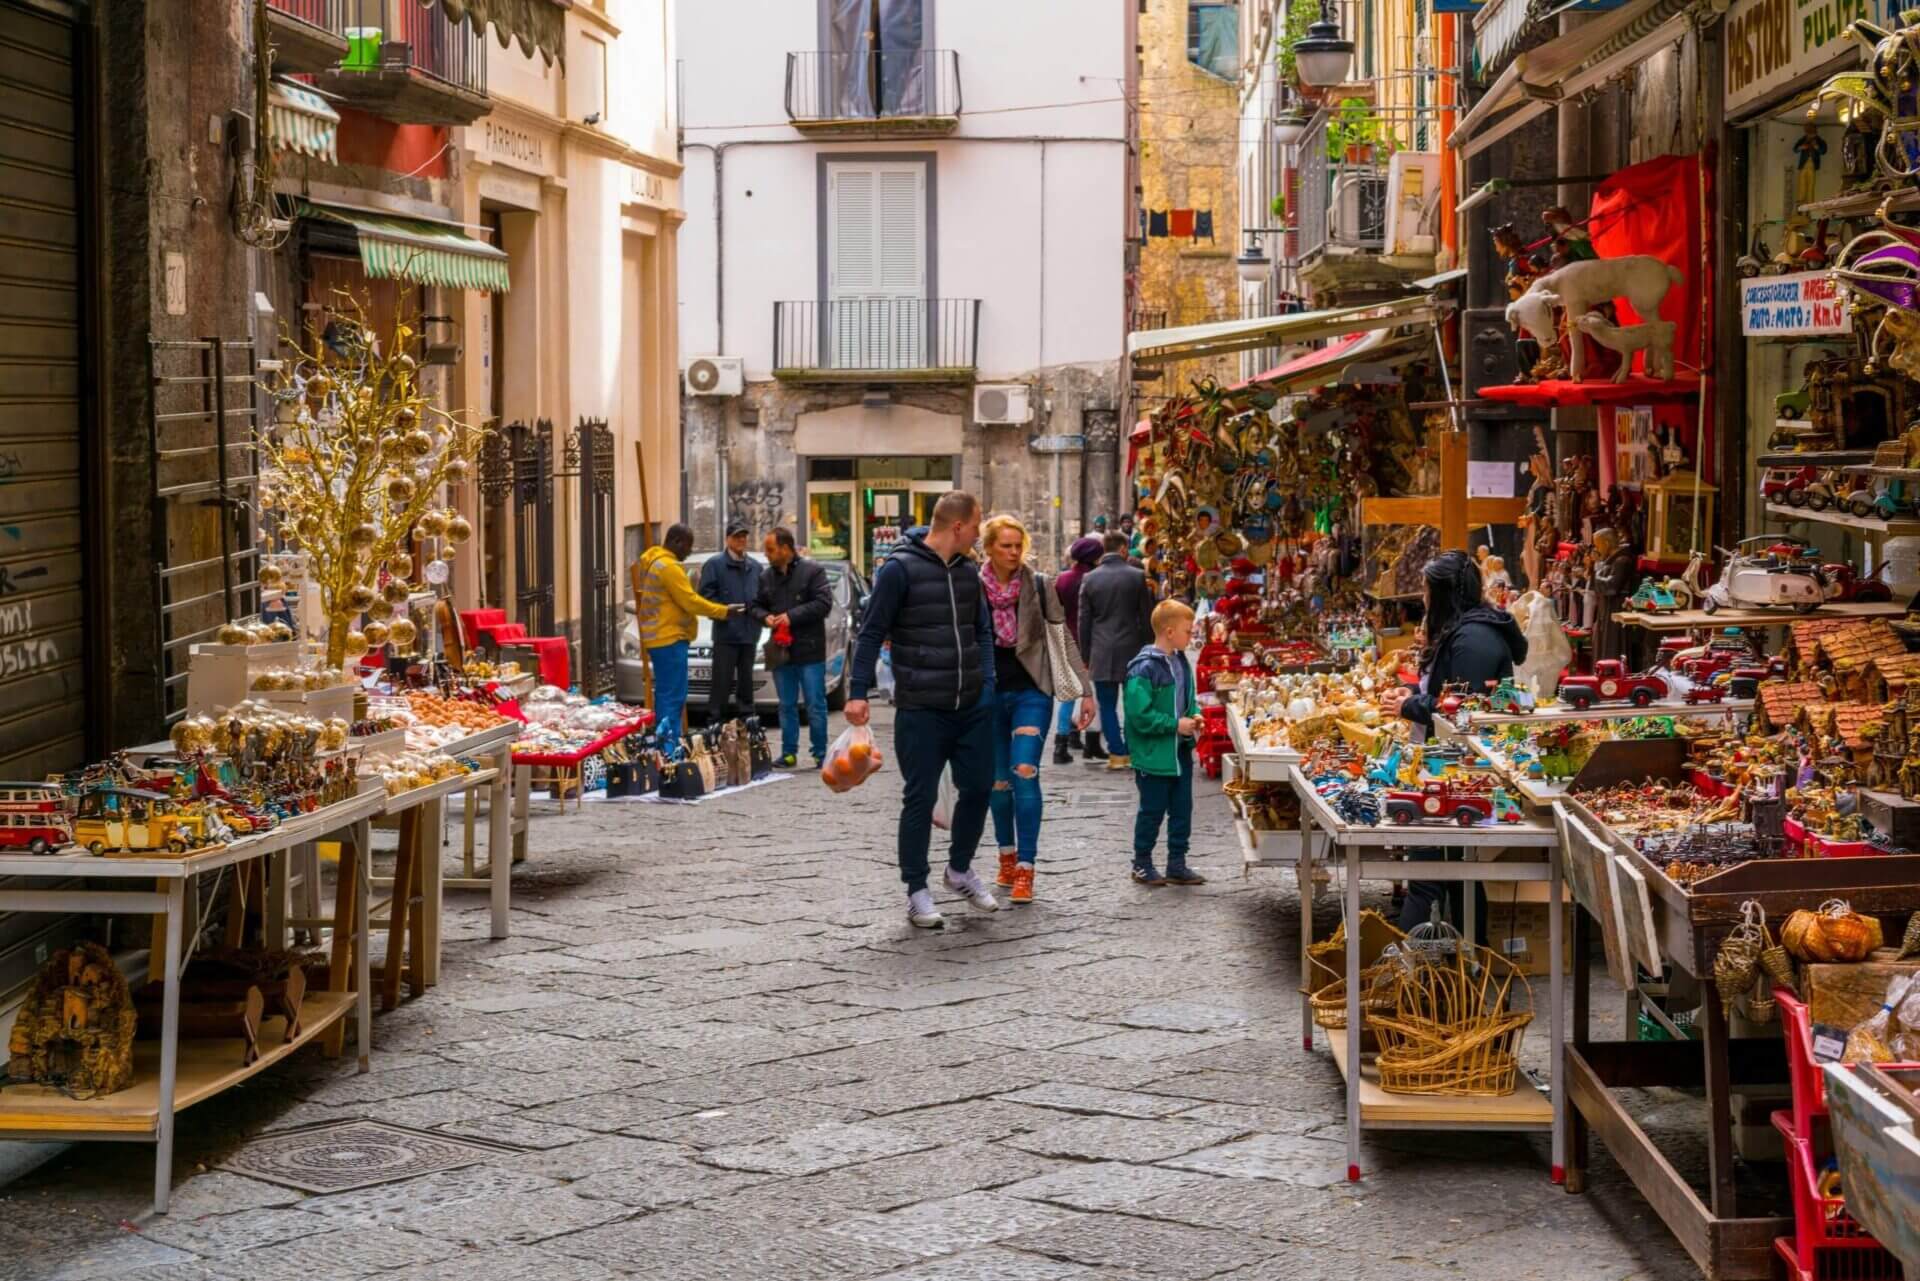 naples-italy-february-27-2016-people-along-the-via-san-gregorio-armeno-a-street-famous-for-its-artisan-shops-selling-nativity-displays-in-naples-italy-stockpack-istock